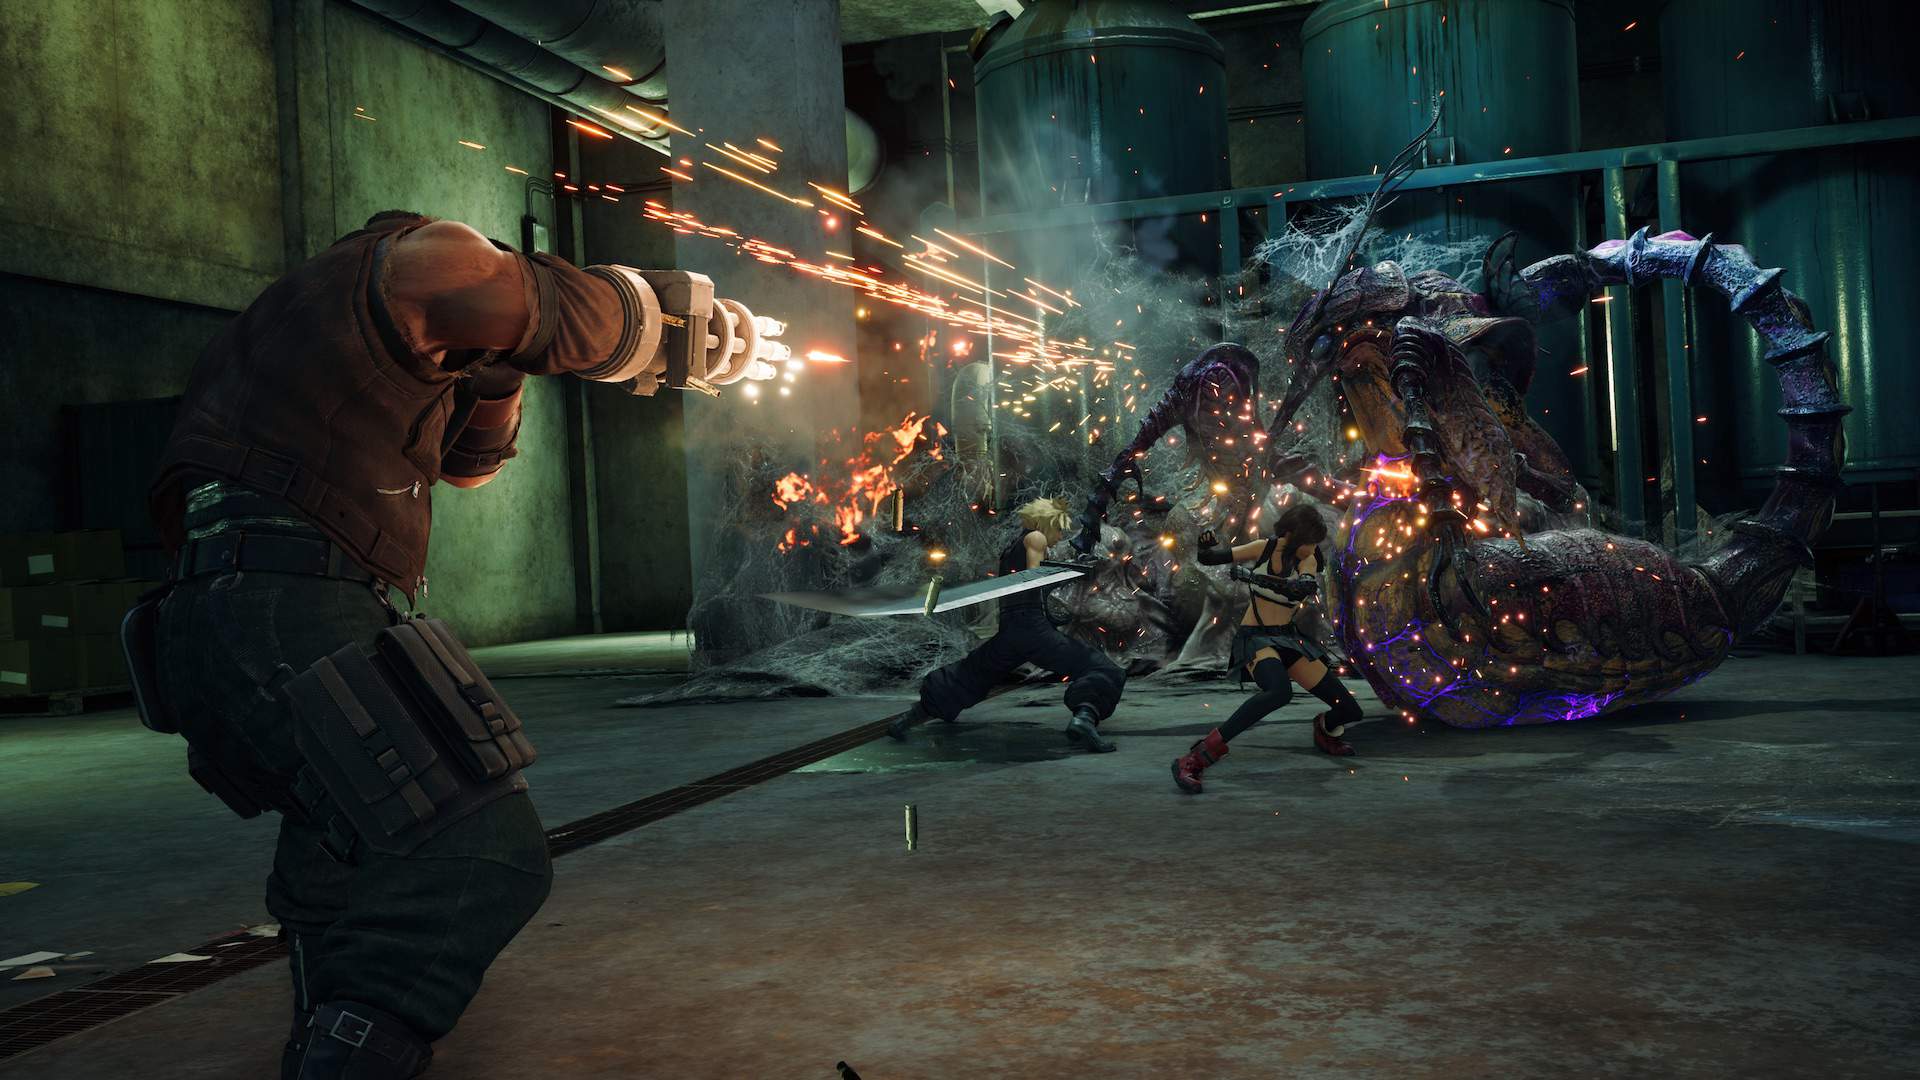 Barret firing at a group of monsters with his gun arm. Cloud and Tifa can be seen attacking from melee range.